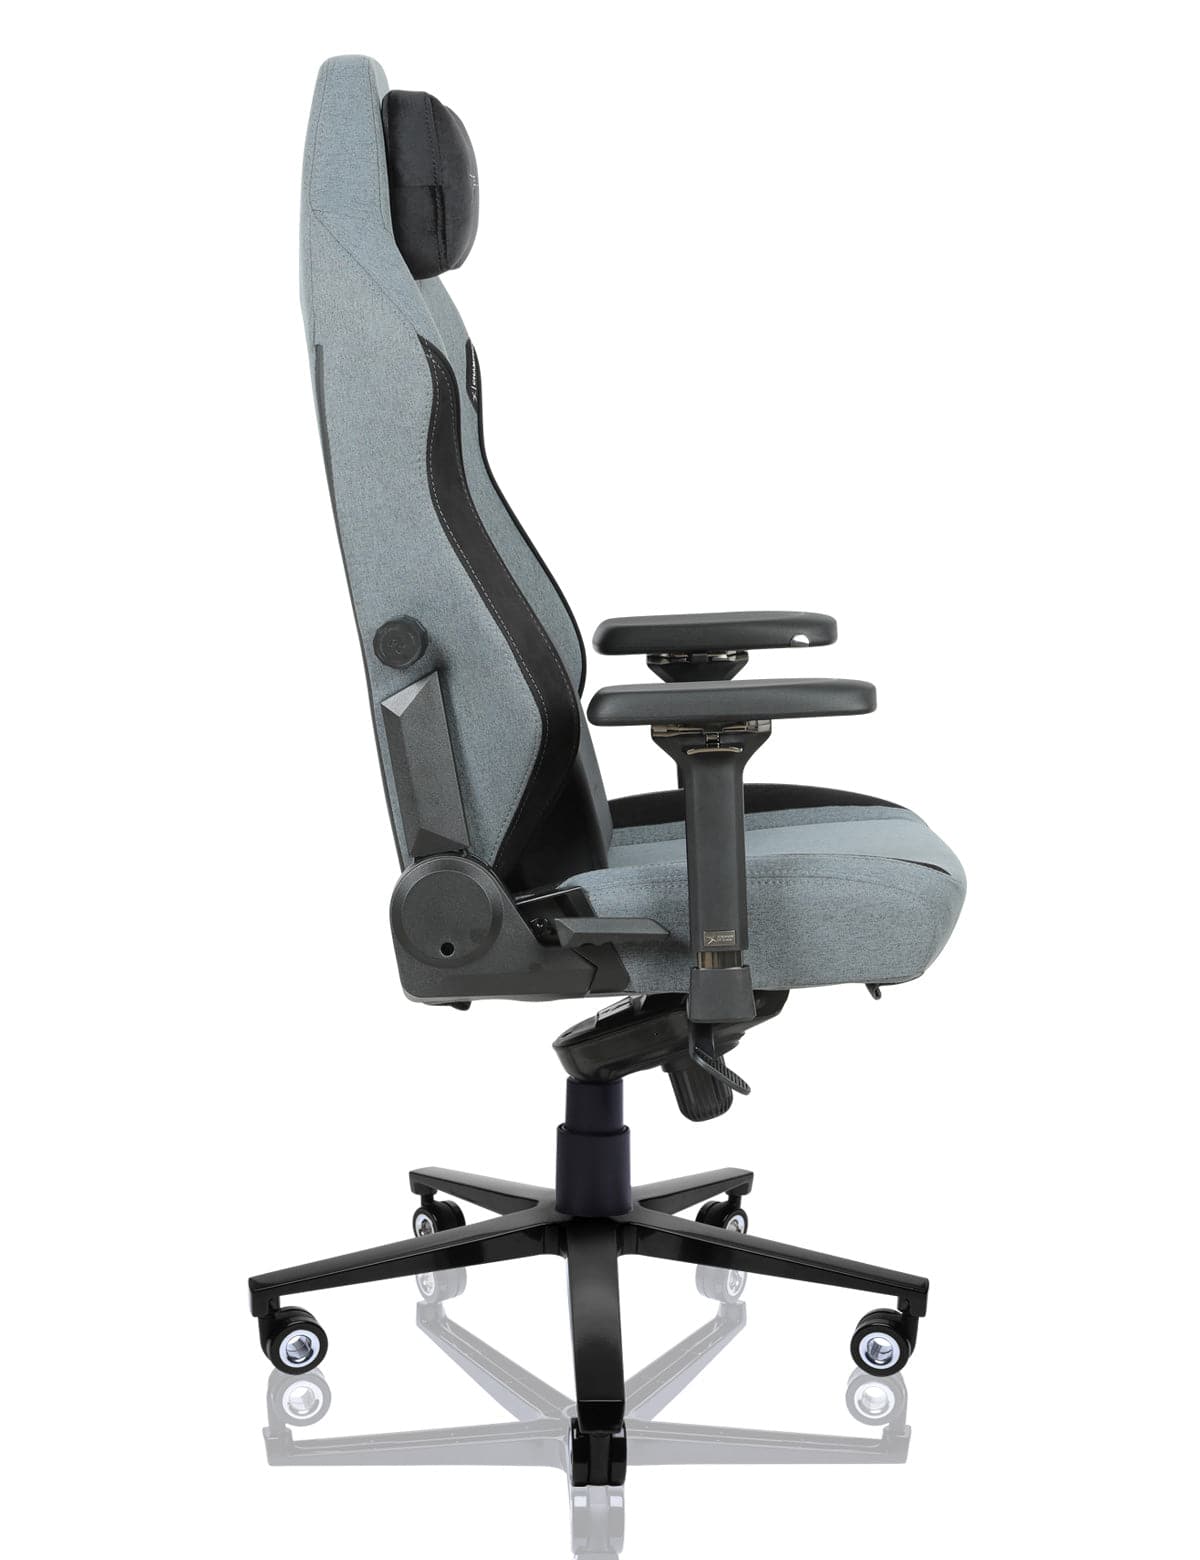 E-WIN Champion Upgraded Series Ergonomic Computer Gaming Office Chair with Pillows - CPG-REV